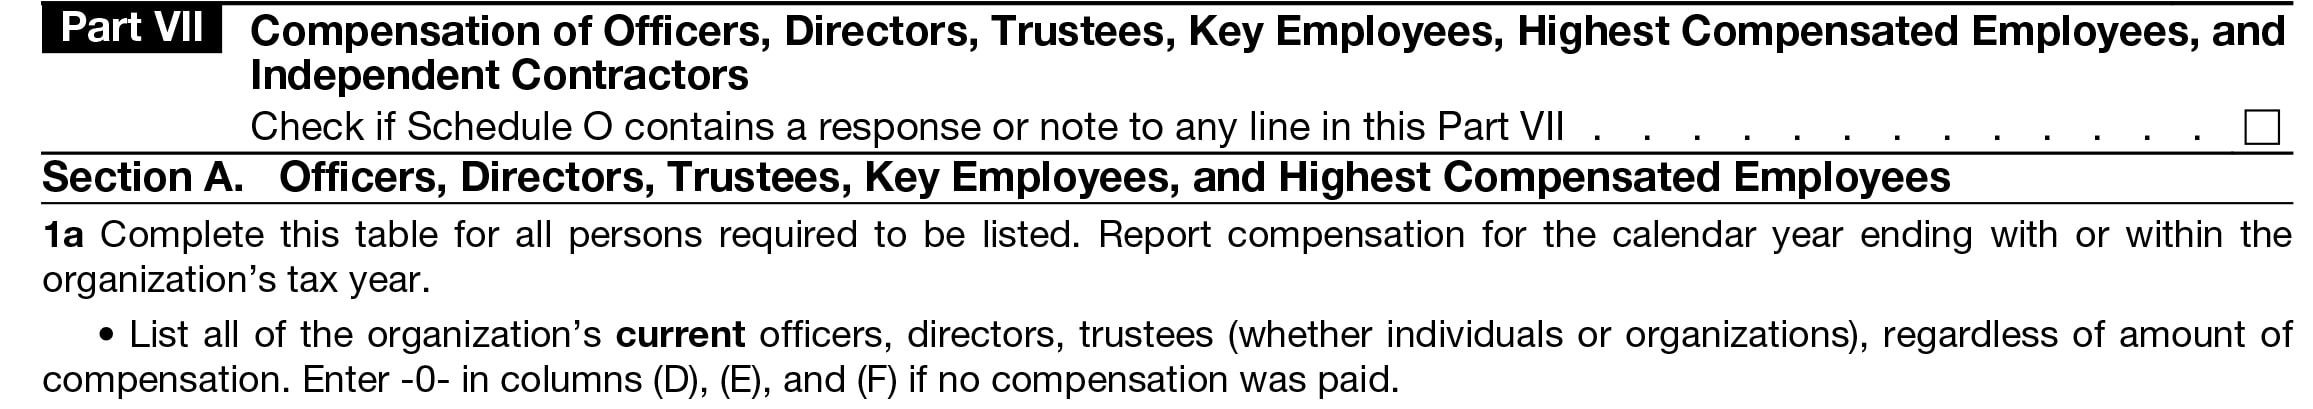 Instructions to complete Form 990 Part VII - Compensation of Officers, Directors, Trustees, Key Employees, Highest Compensated Employees, and Independent Contractors